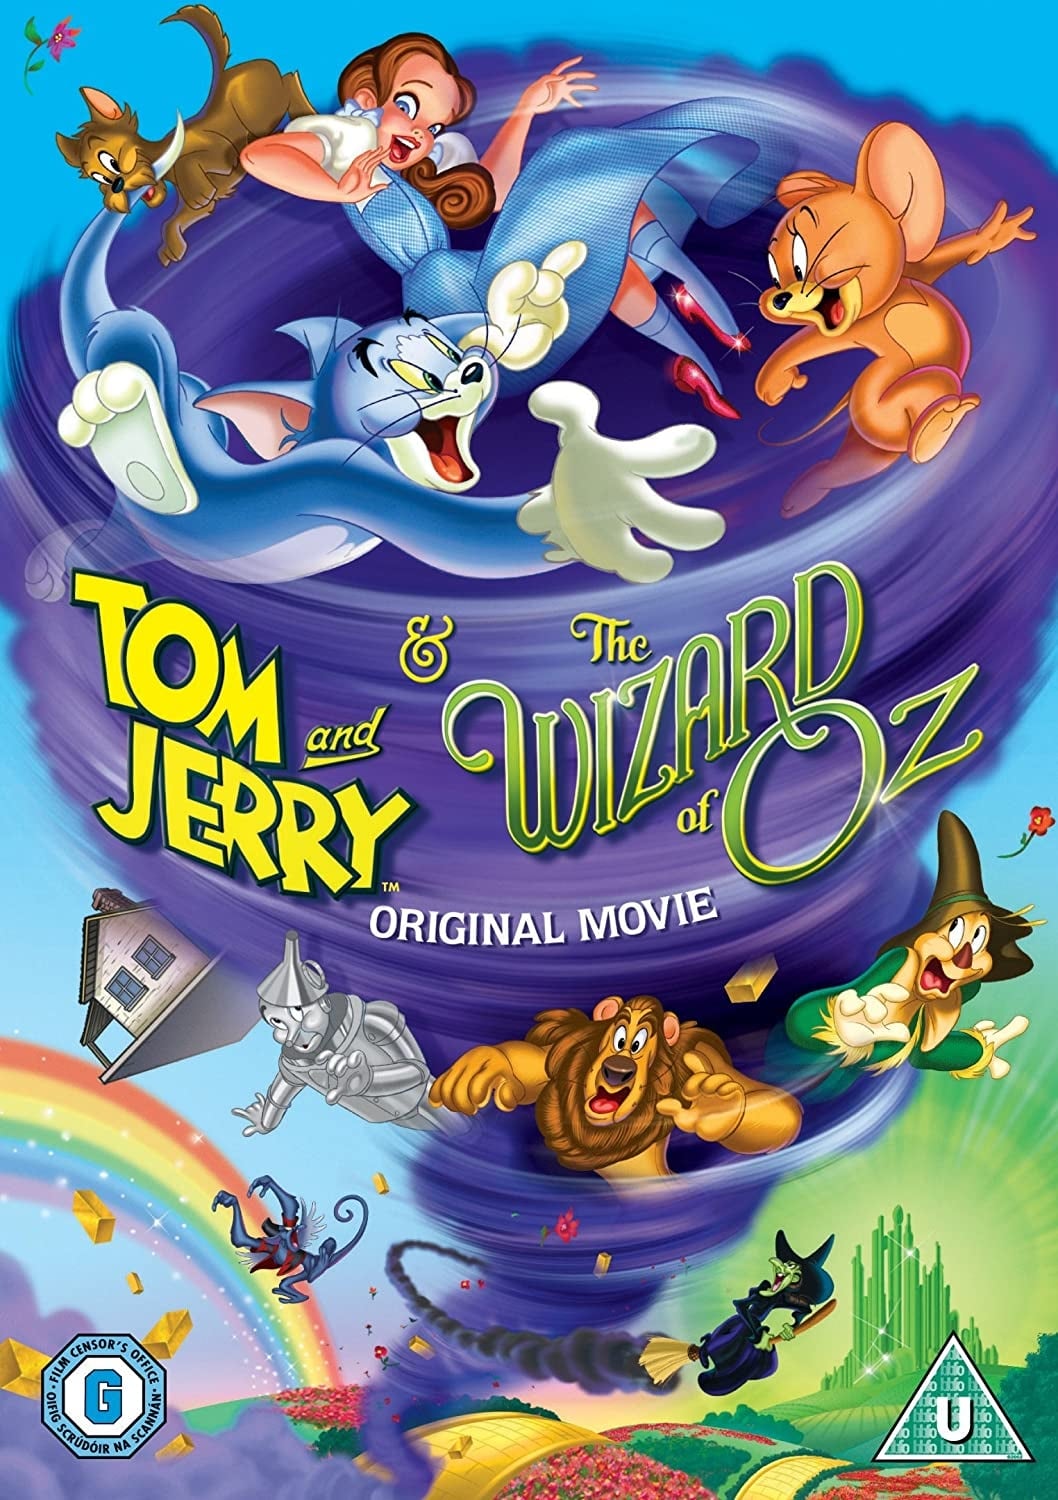 Poster for the movie "Tom and Jerry & The Wizard of Oz"